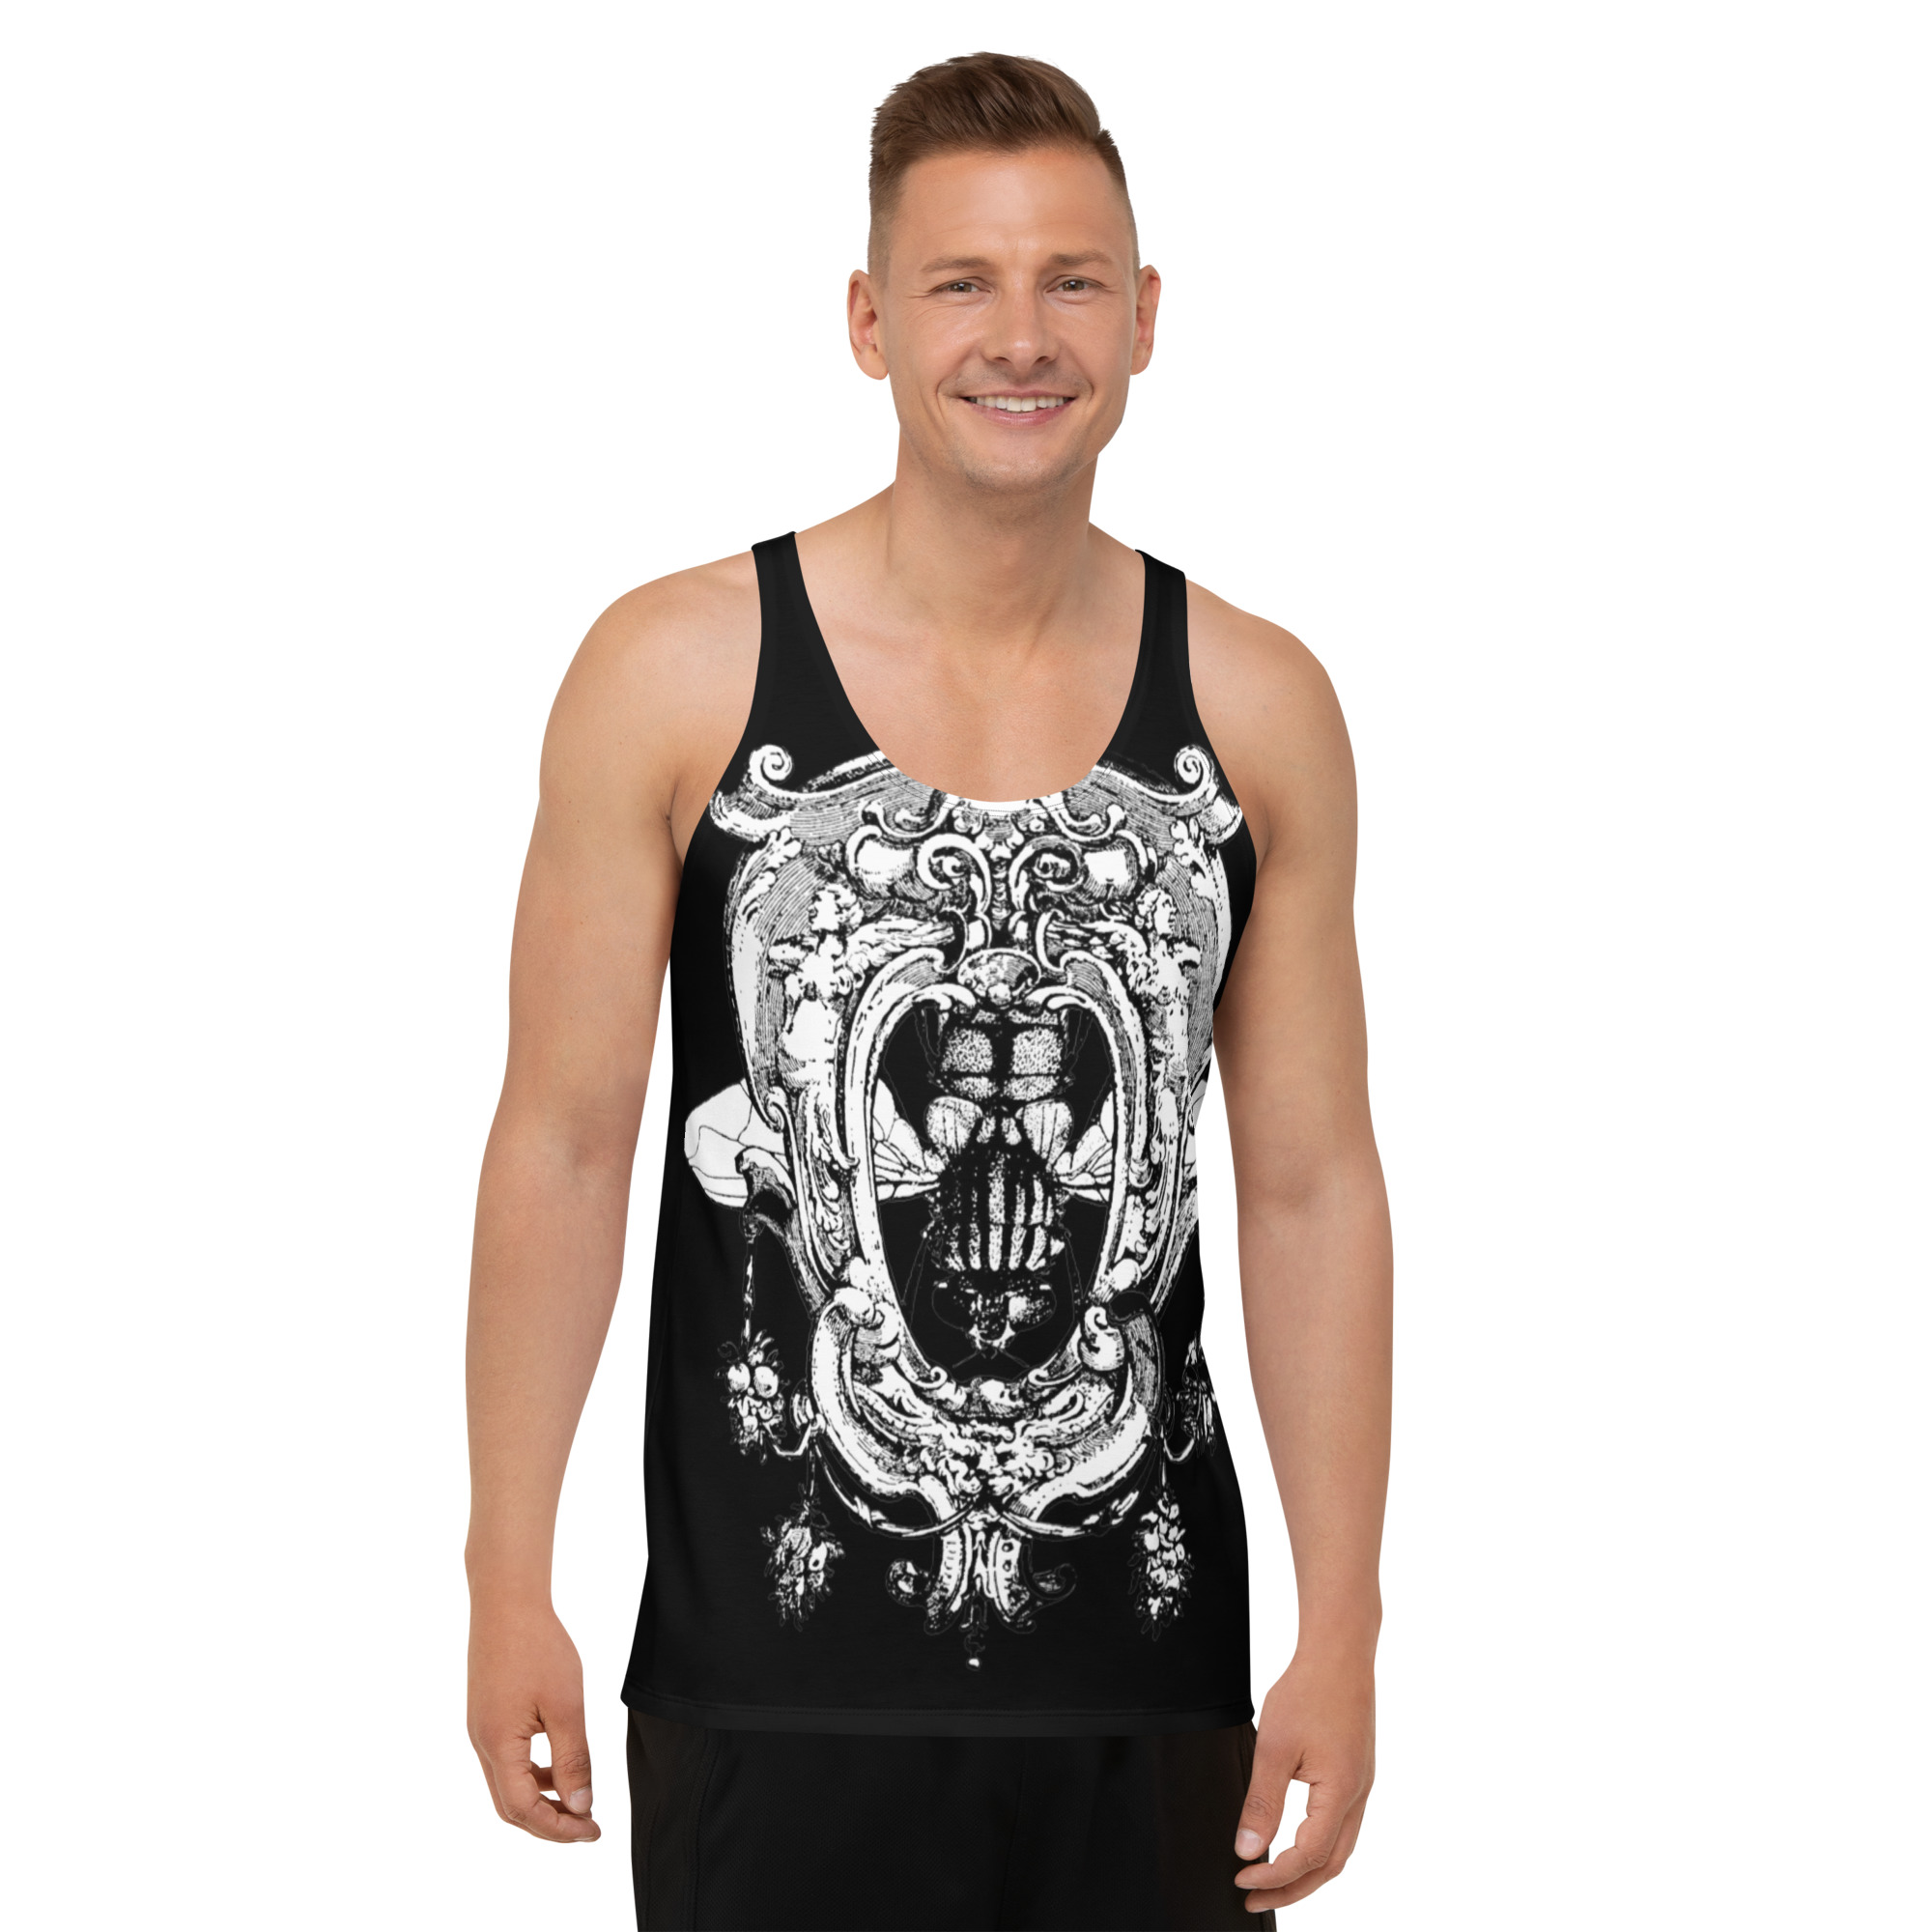 all-over-print-mens-tank-top-white-front-6350632969bab.jpg